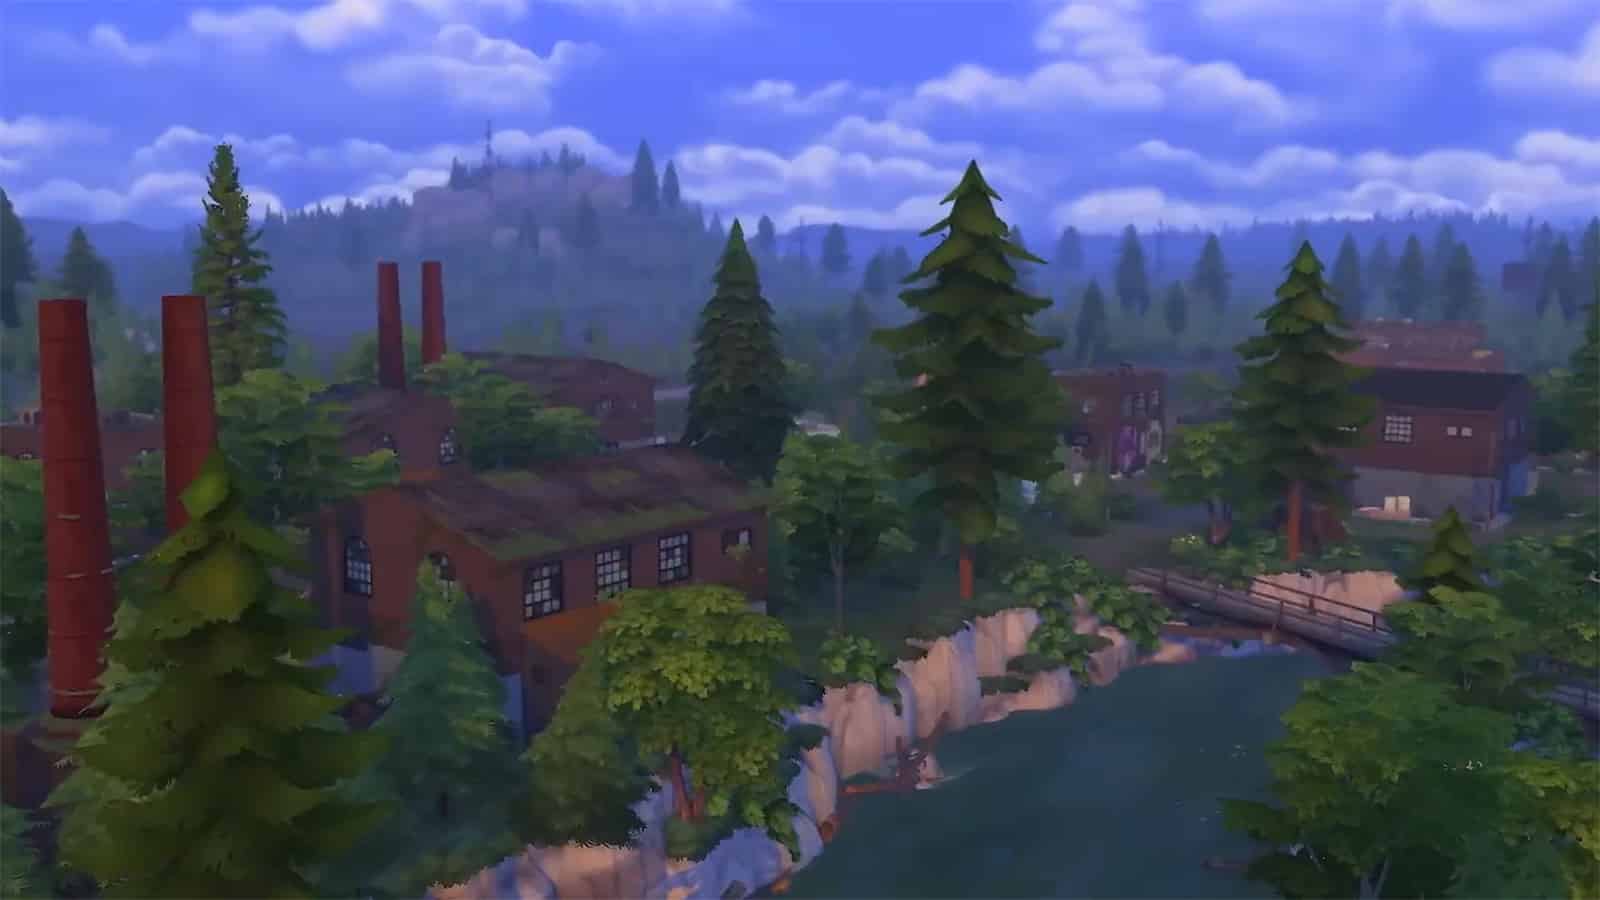 The new world in The Sims 4 Werewolves Game Pack, Moonwood Mill